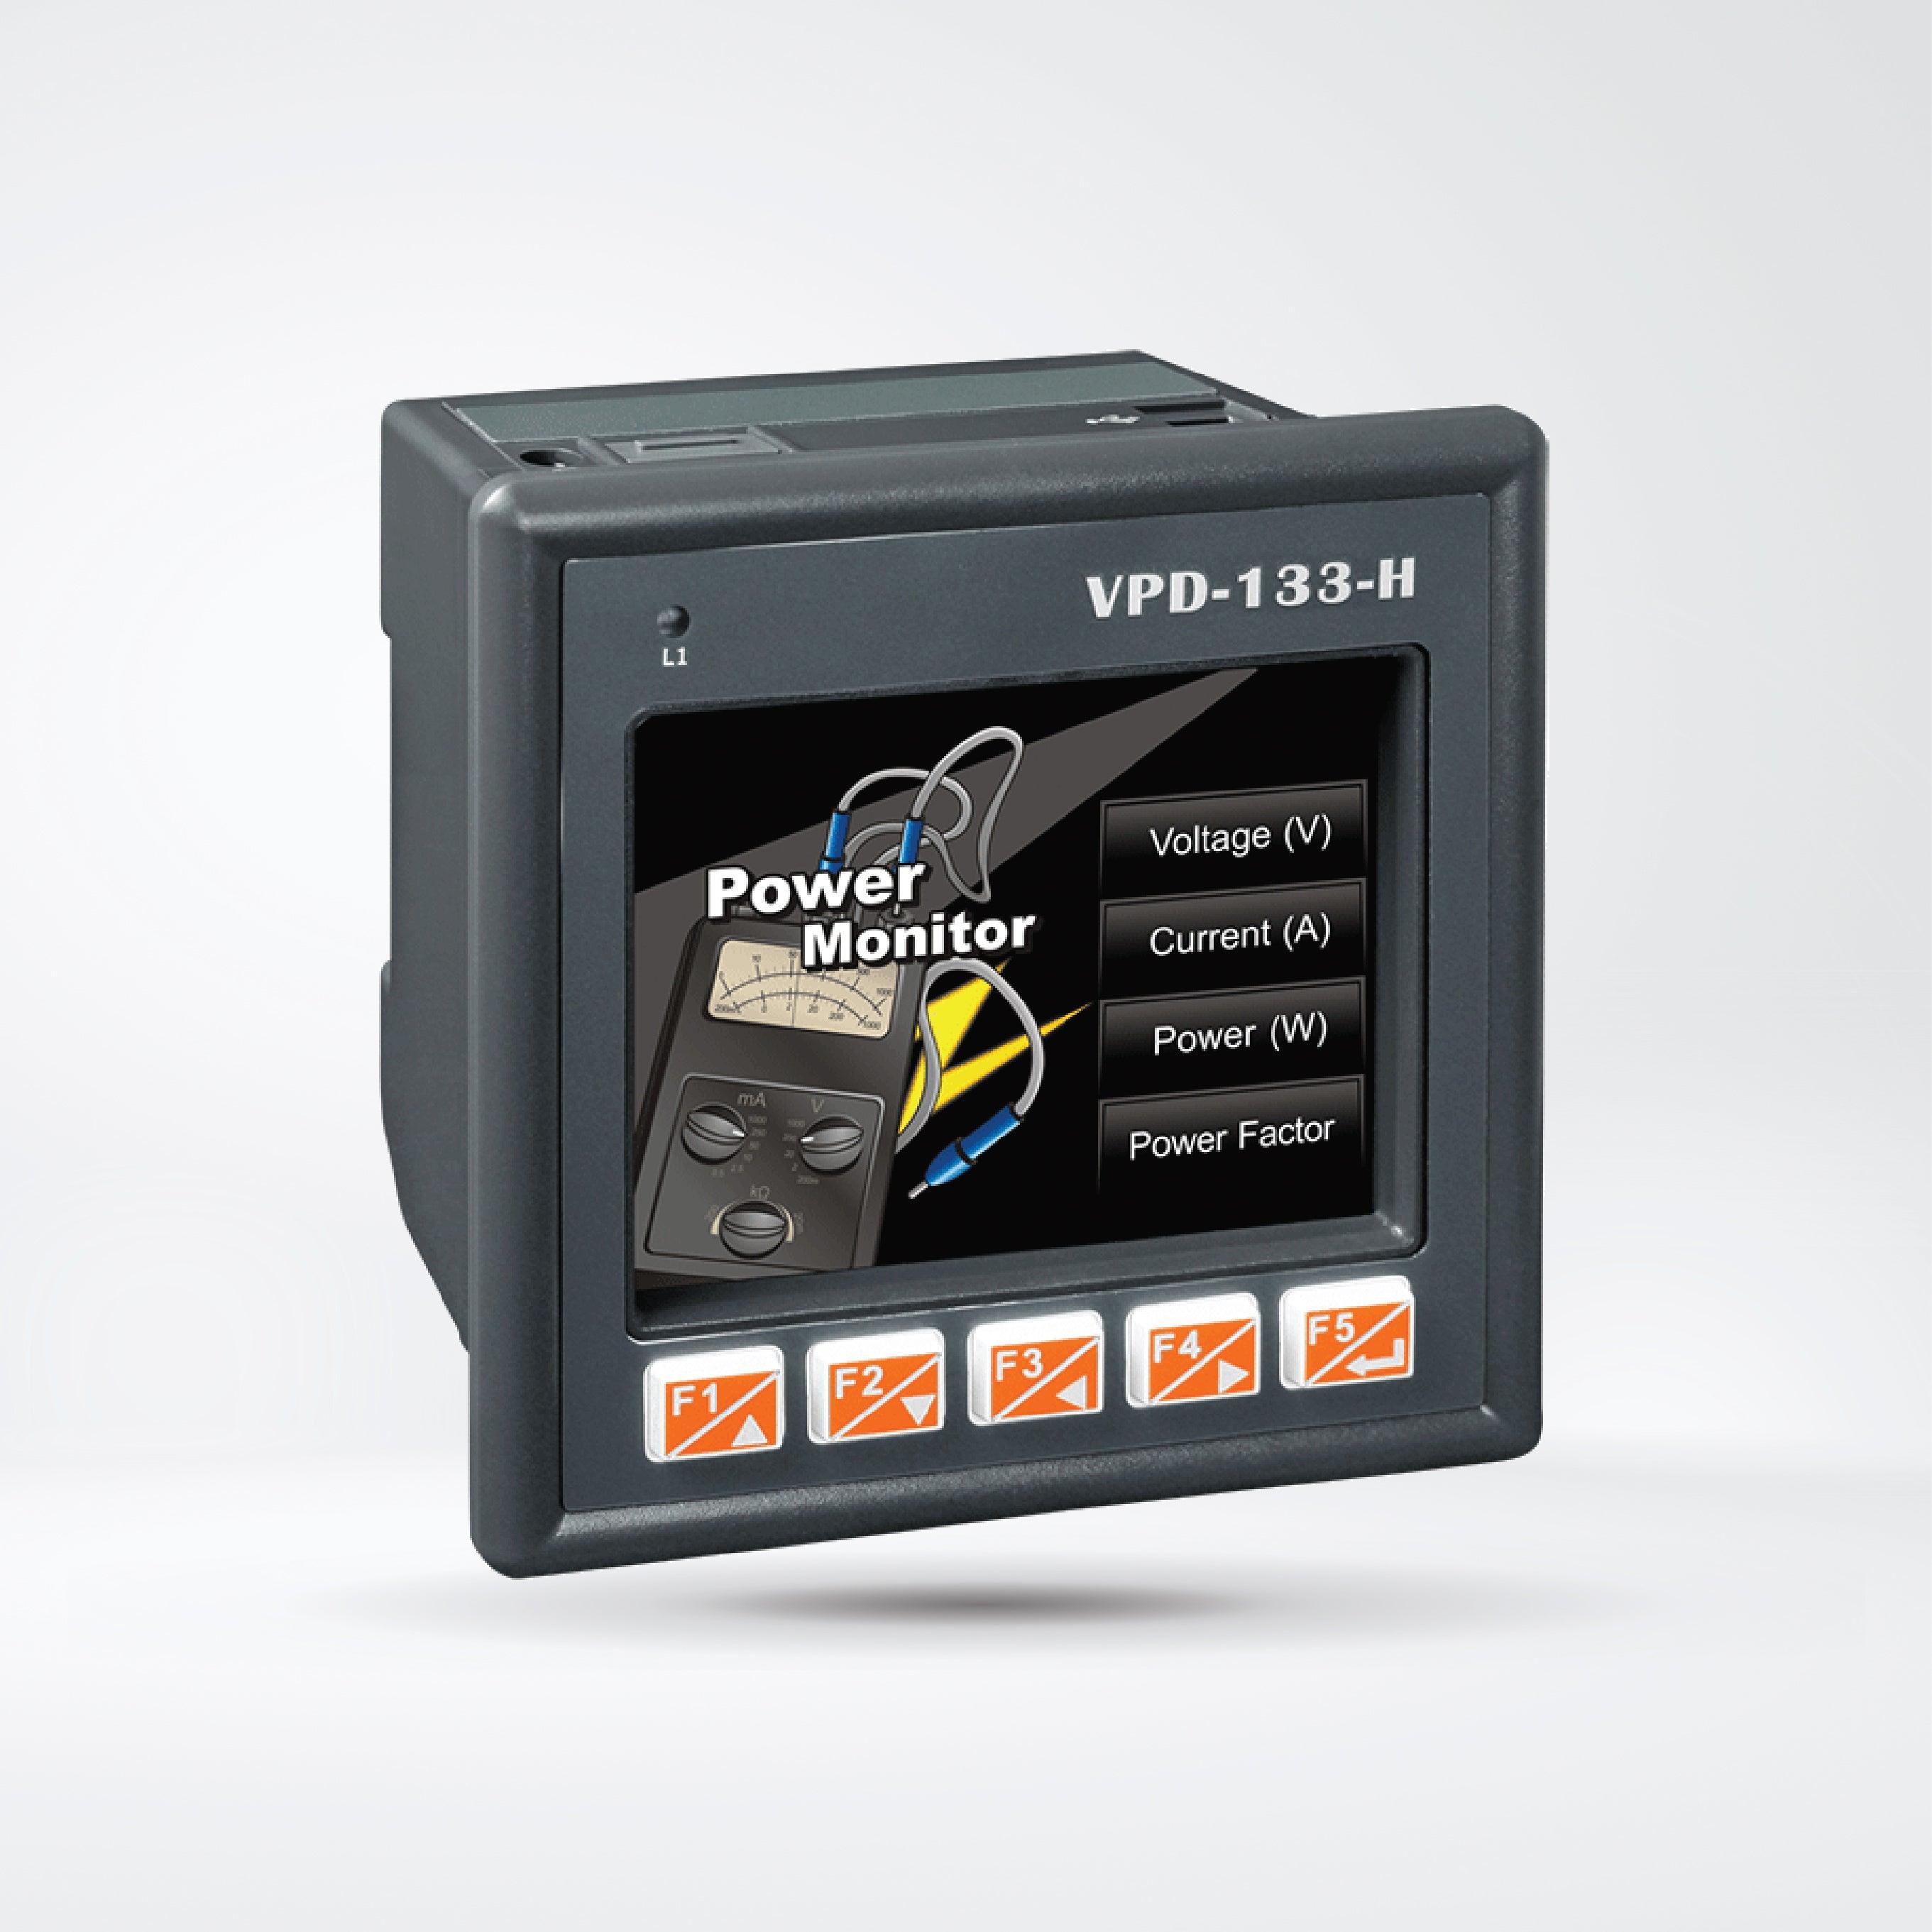 VPD-133-H 3.5" Touch HMI Device with 2 x RS-232/RS-485, Ethernet (PoE) and Rubber Keypad - Riverplus